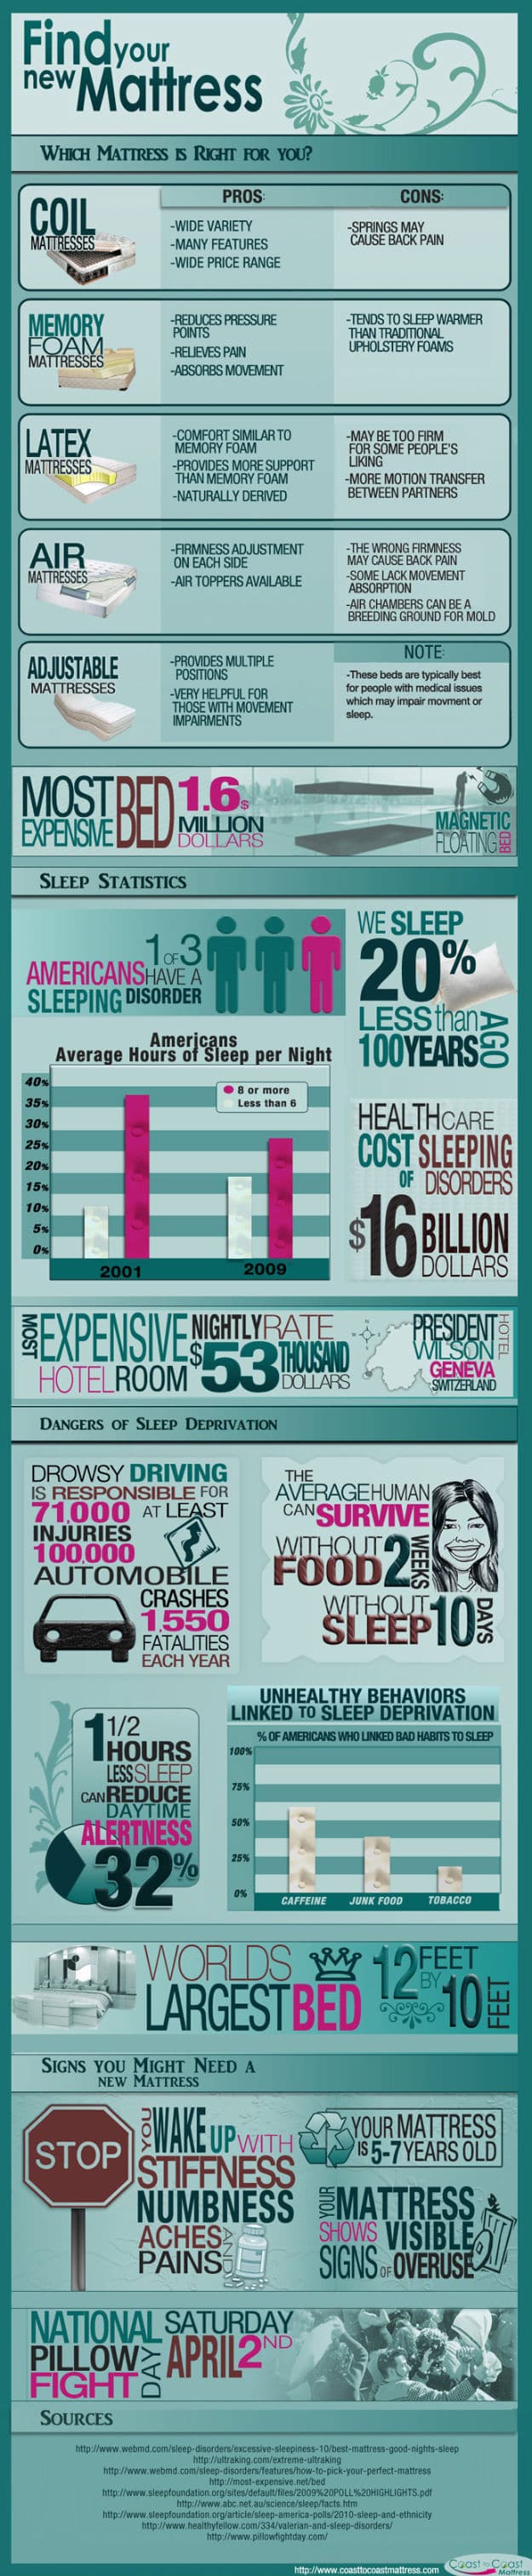 facts about sleep and mattress